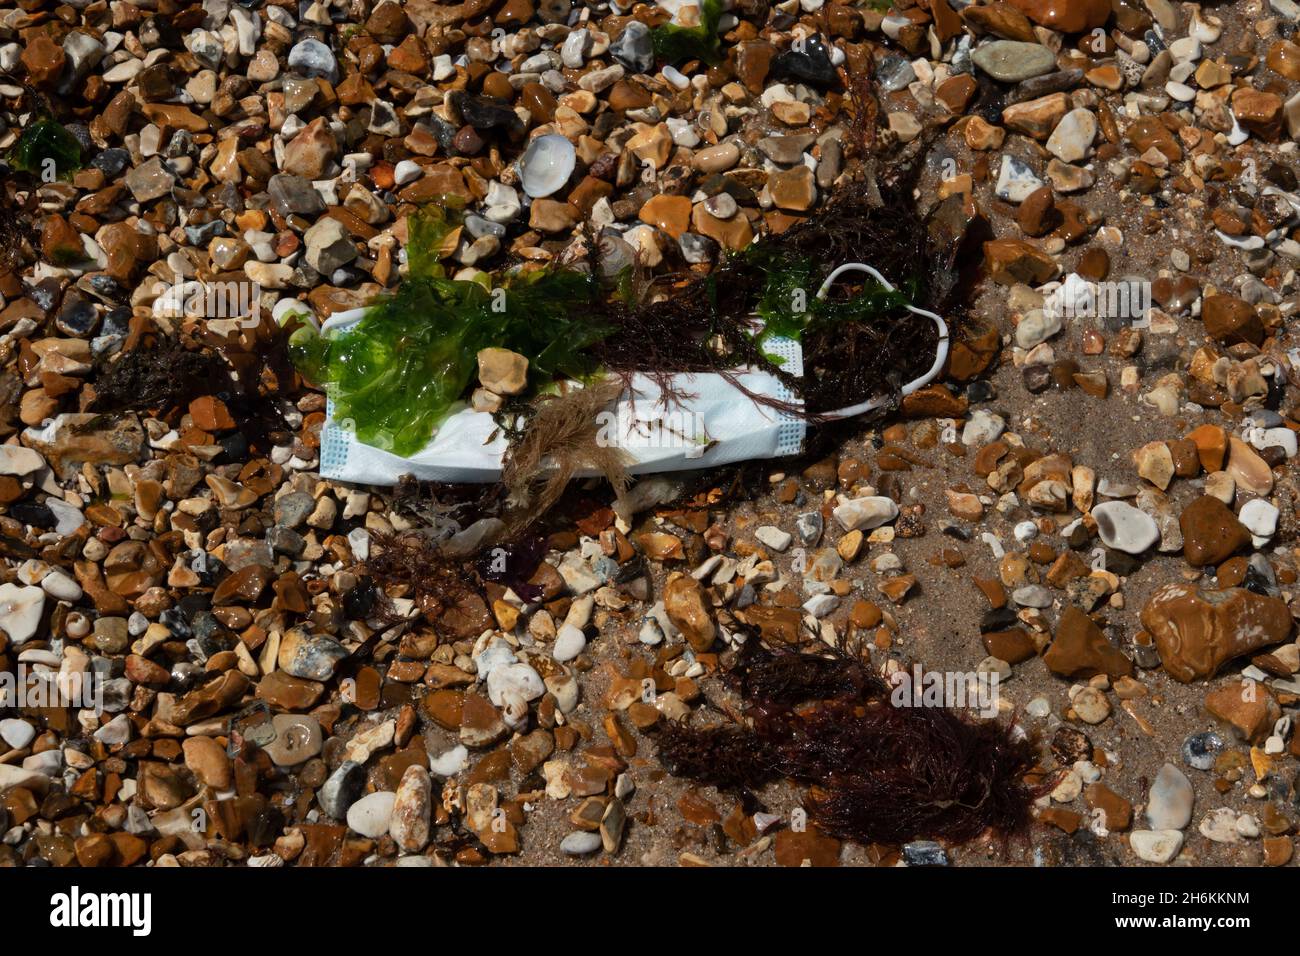 Face mask washed up on beach with seaweed attached Stock Photo